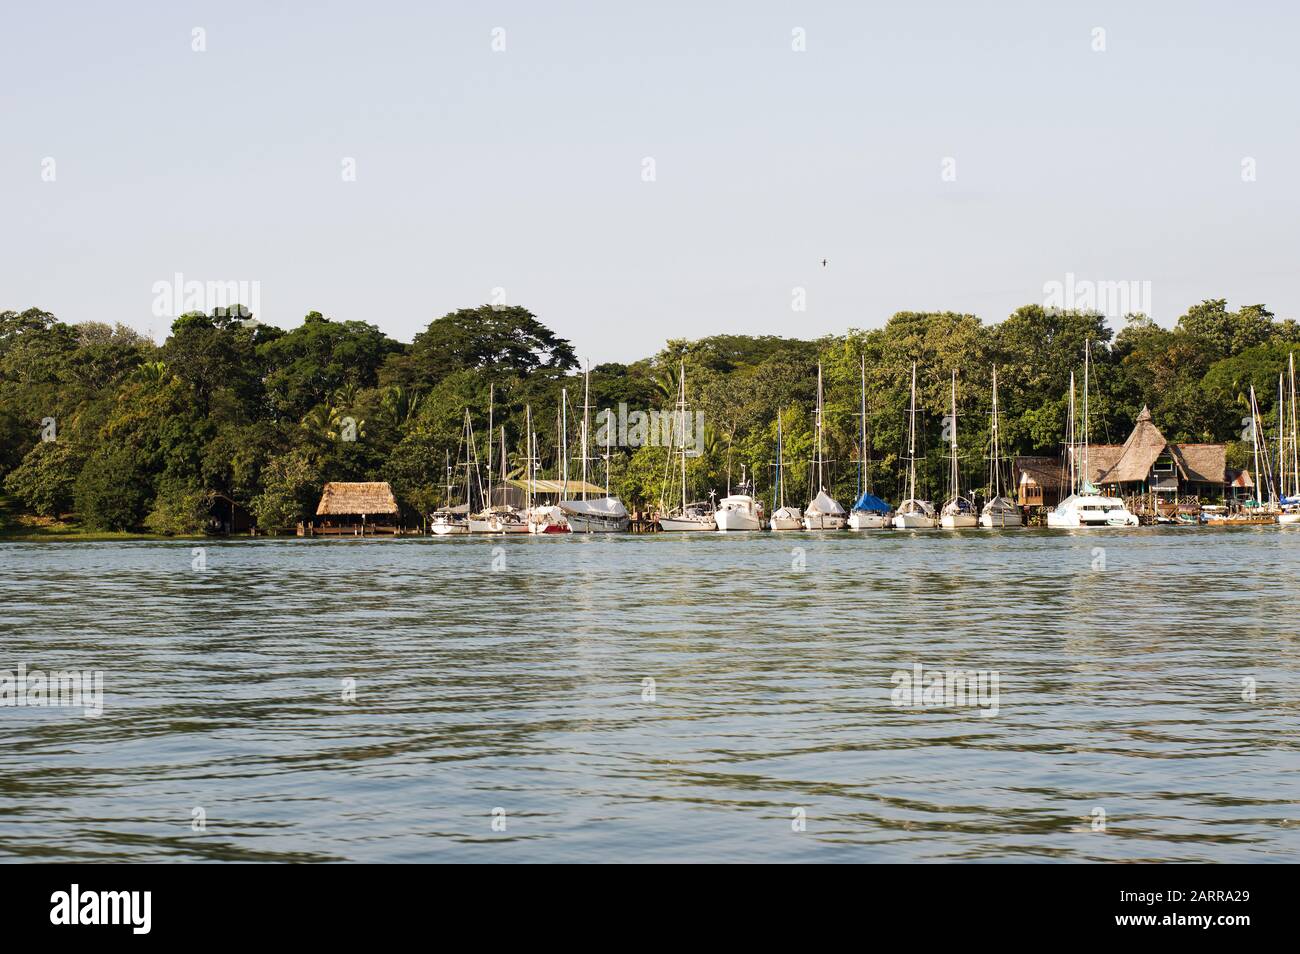 Harbor with sailboats at the Rio Dulce river in Guatemala Stock Photo